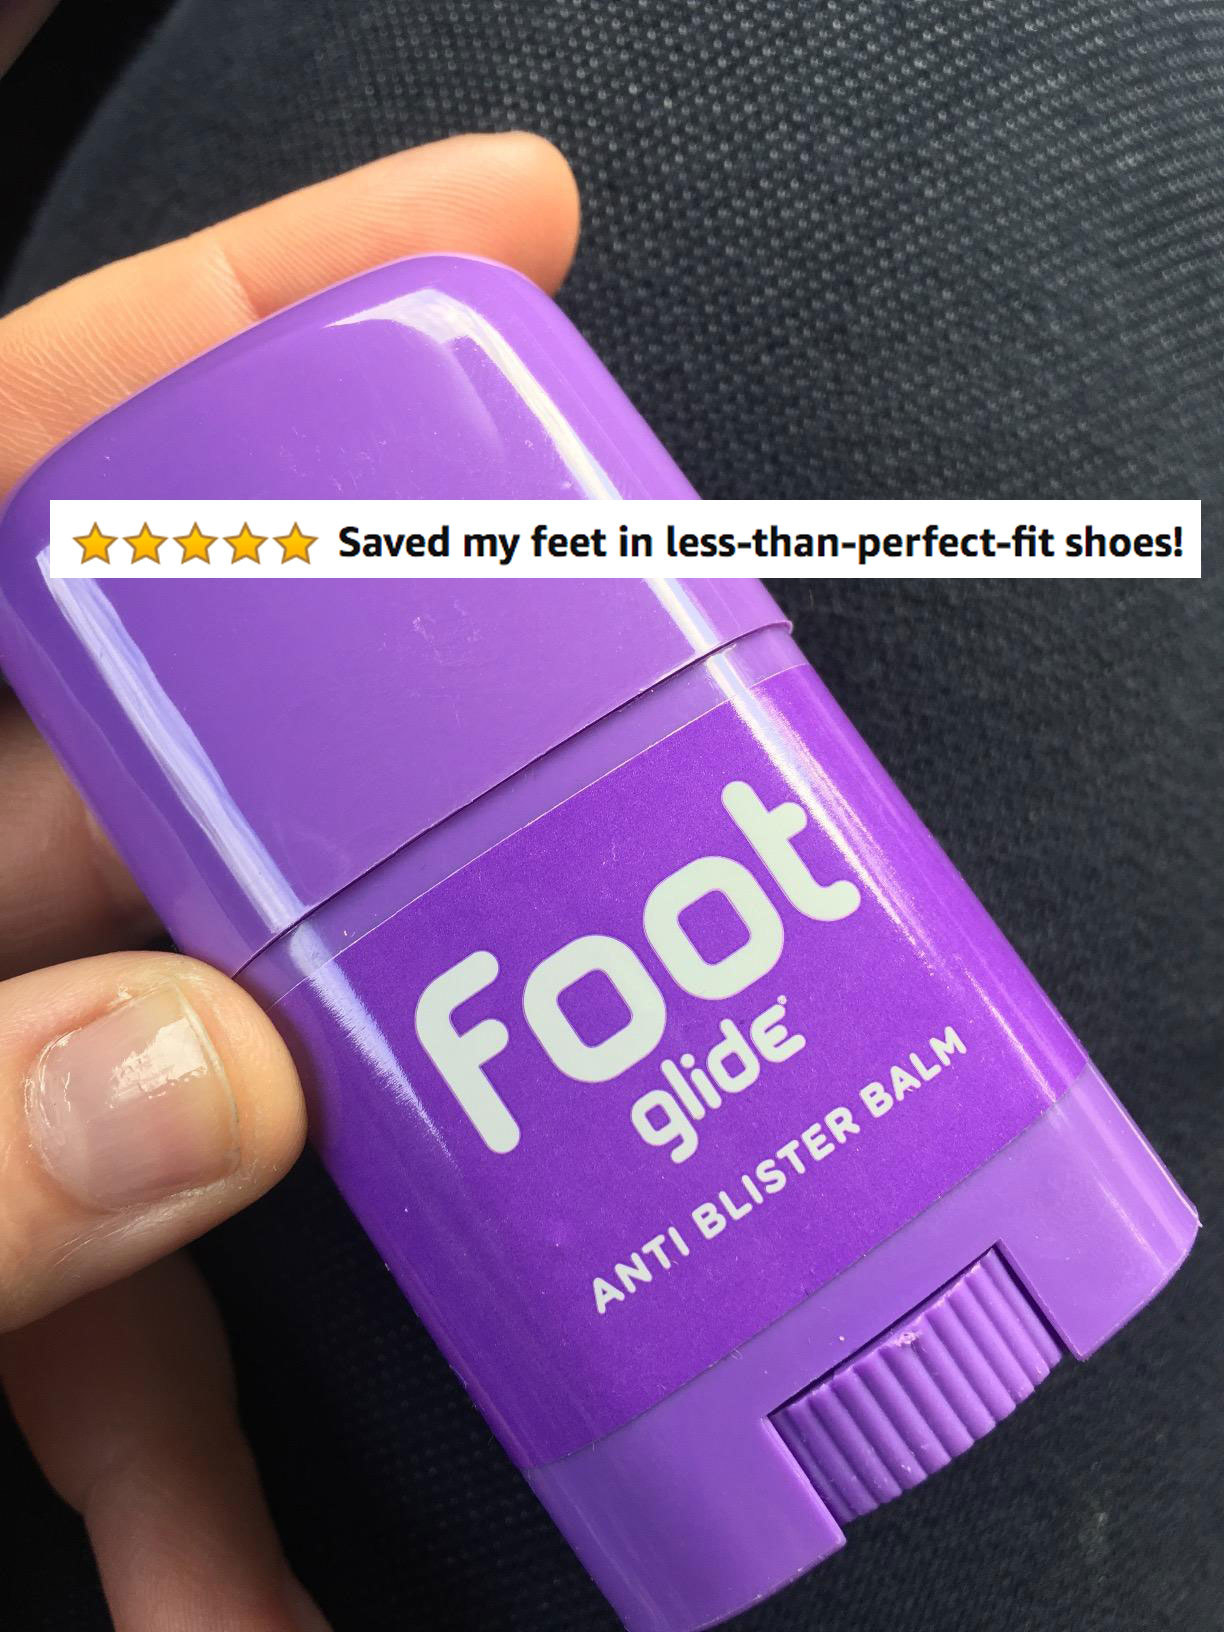 The deodorant-like roll-up stick, with five stars and review text &quot;saved my feet in less-than-perfect-fit shoes&quot;